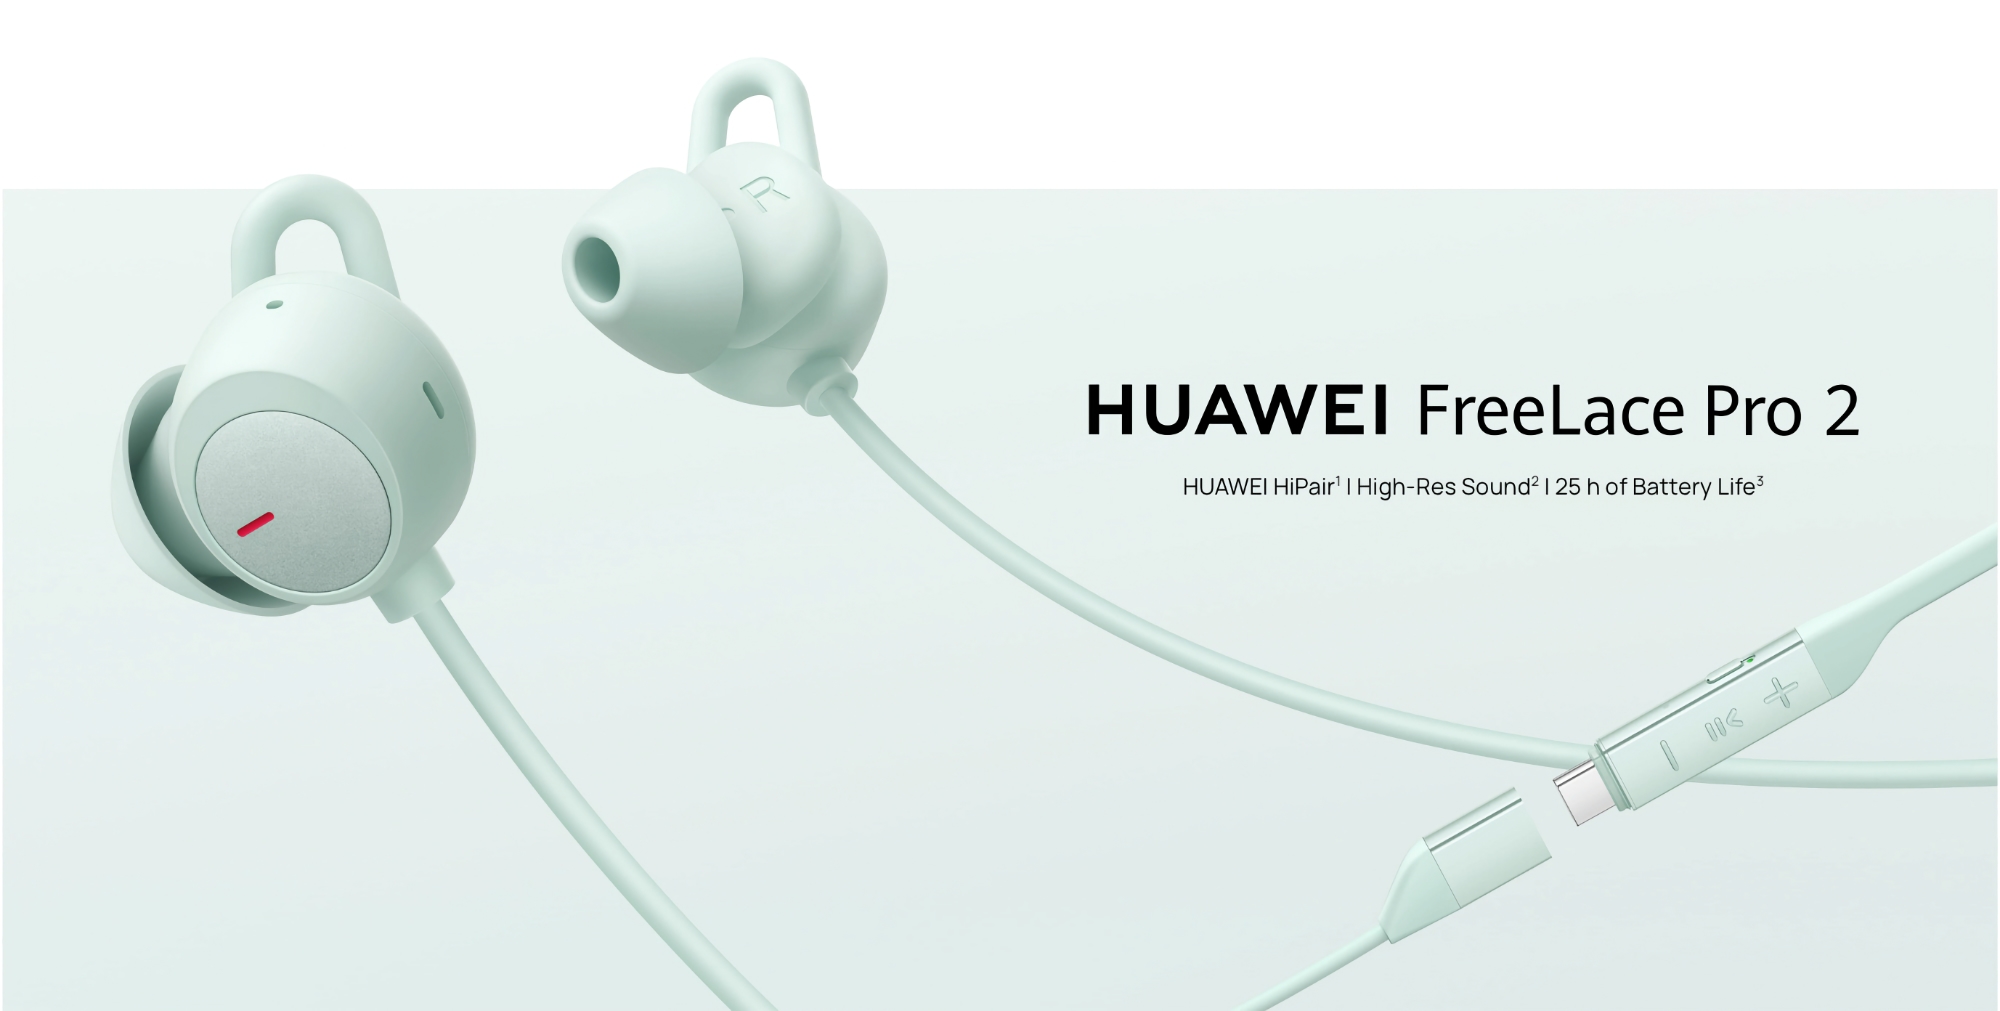 Huawei has launched the FreeLace Pro 2 with ANC and up to 25 hours of battery life in the global marketplace